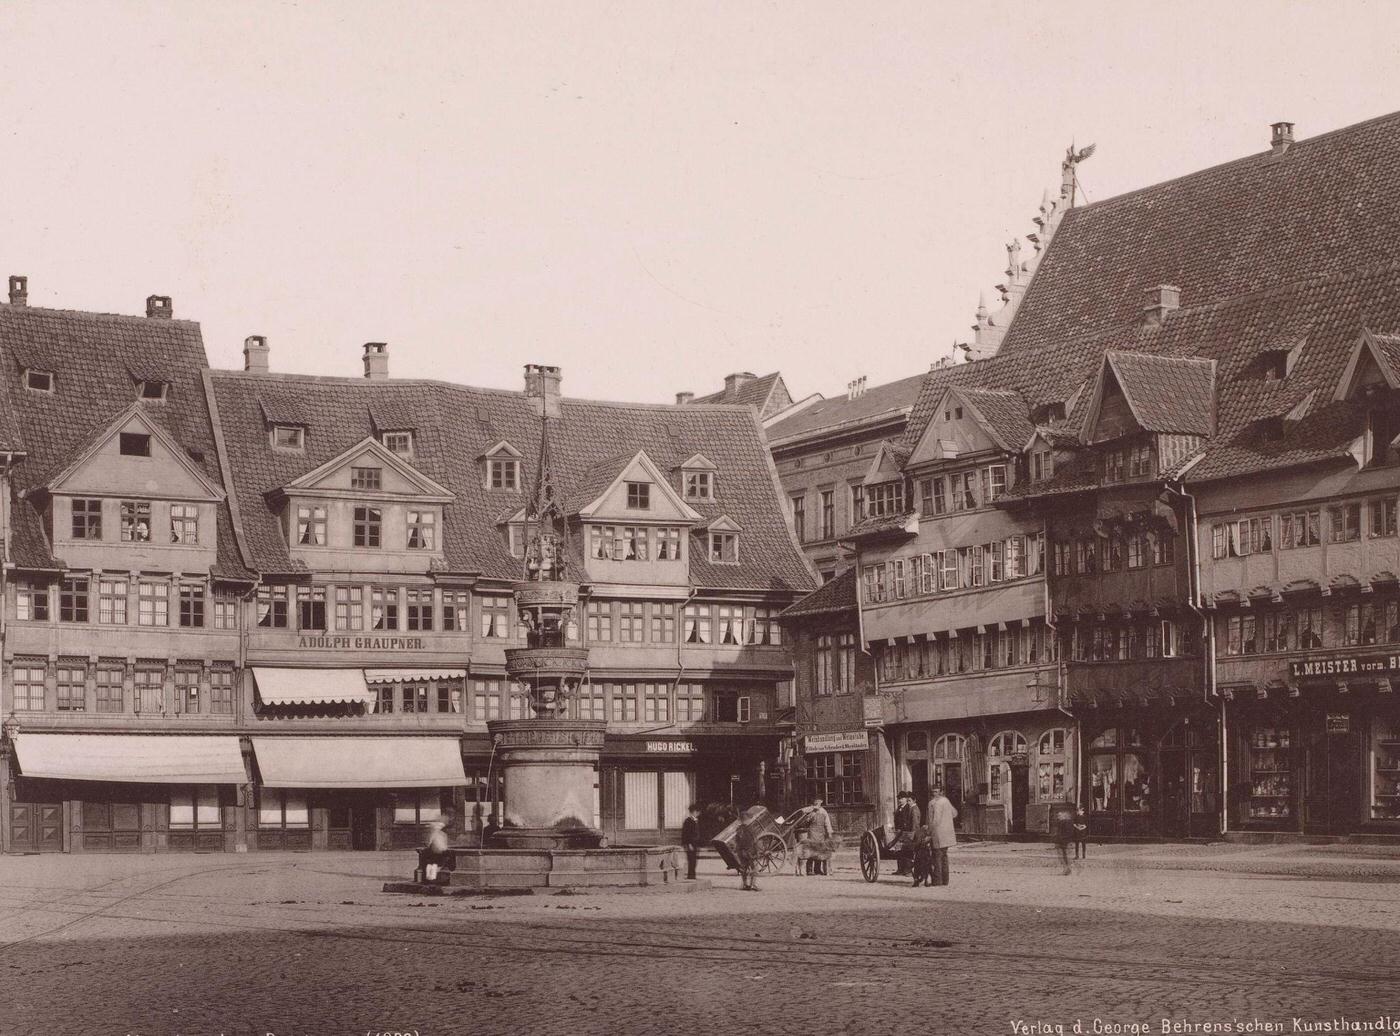 Altstadtmarkt and Poststrasse, Braunschweig, Germany. Historic square with houses, fountain, people, carts. George Behrens, 1886.